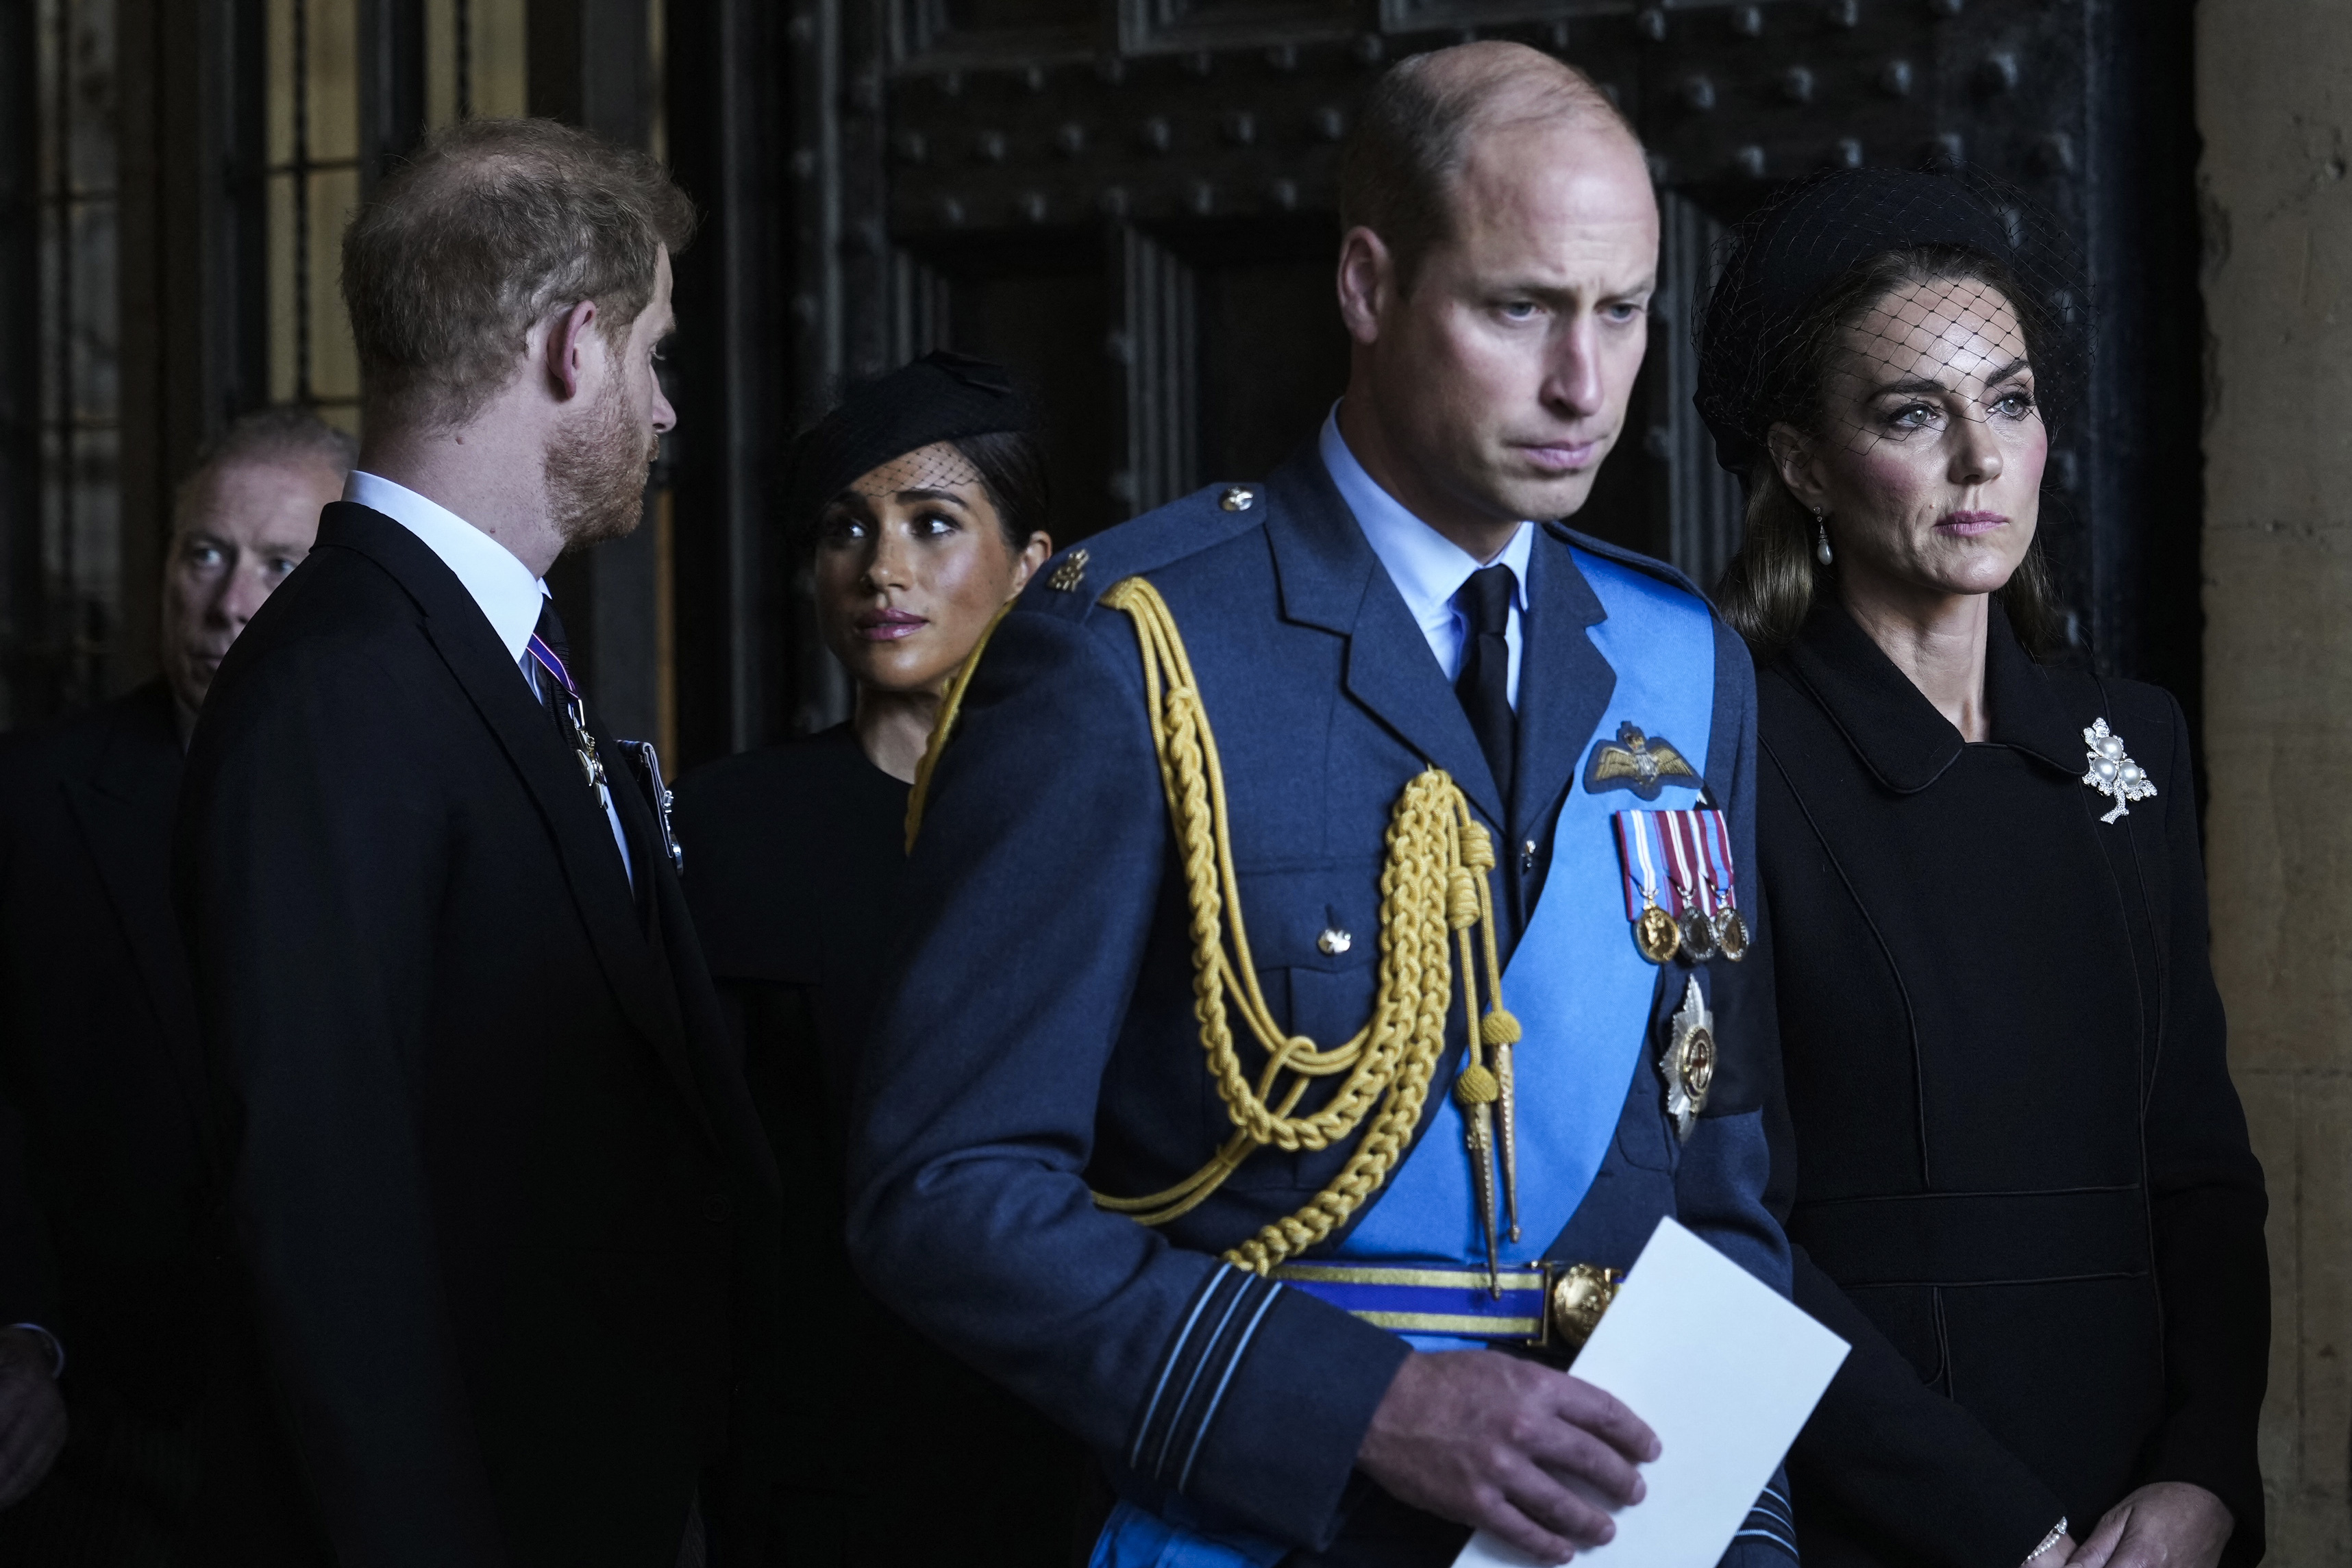 Catherine (R), Princess of Wales, Prince William (2nd R), Prince of Wales, Prince Harry (L), Duke of Sussex, and Meghan (2nd L), Duchess of Sussex, at the Palace of Westminster, where the coffin of Queen Elizabeth II, will lie in state, on September 14, 2022. | Source: Getty Images